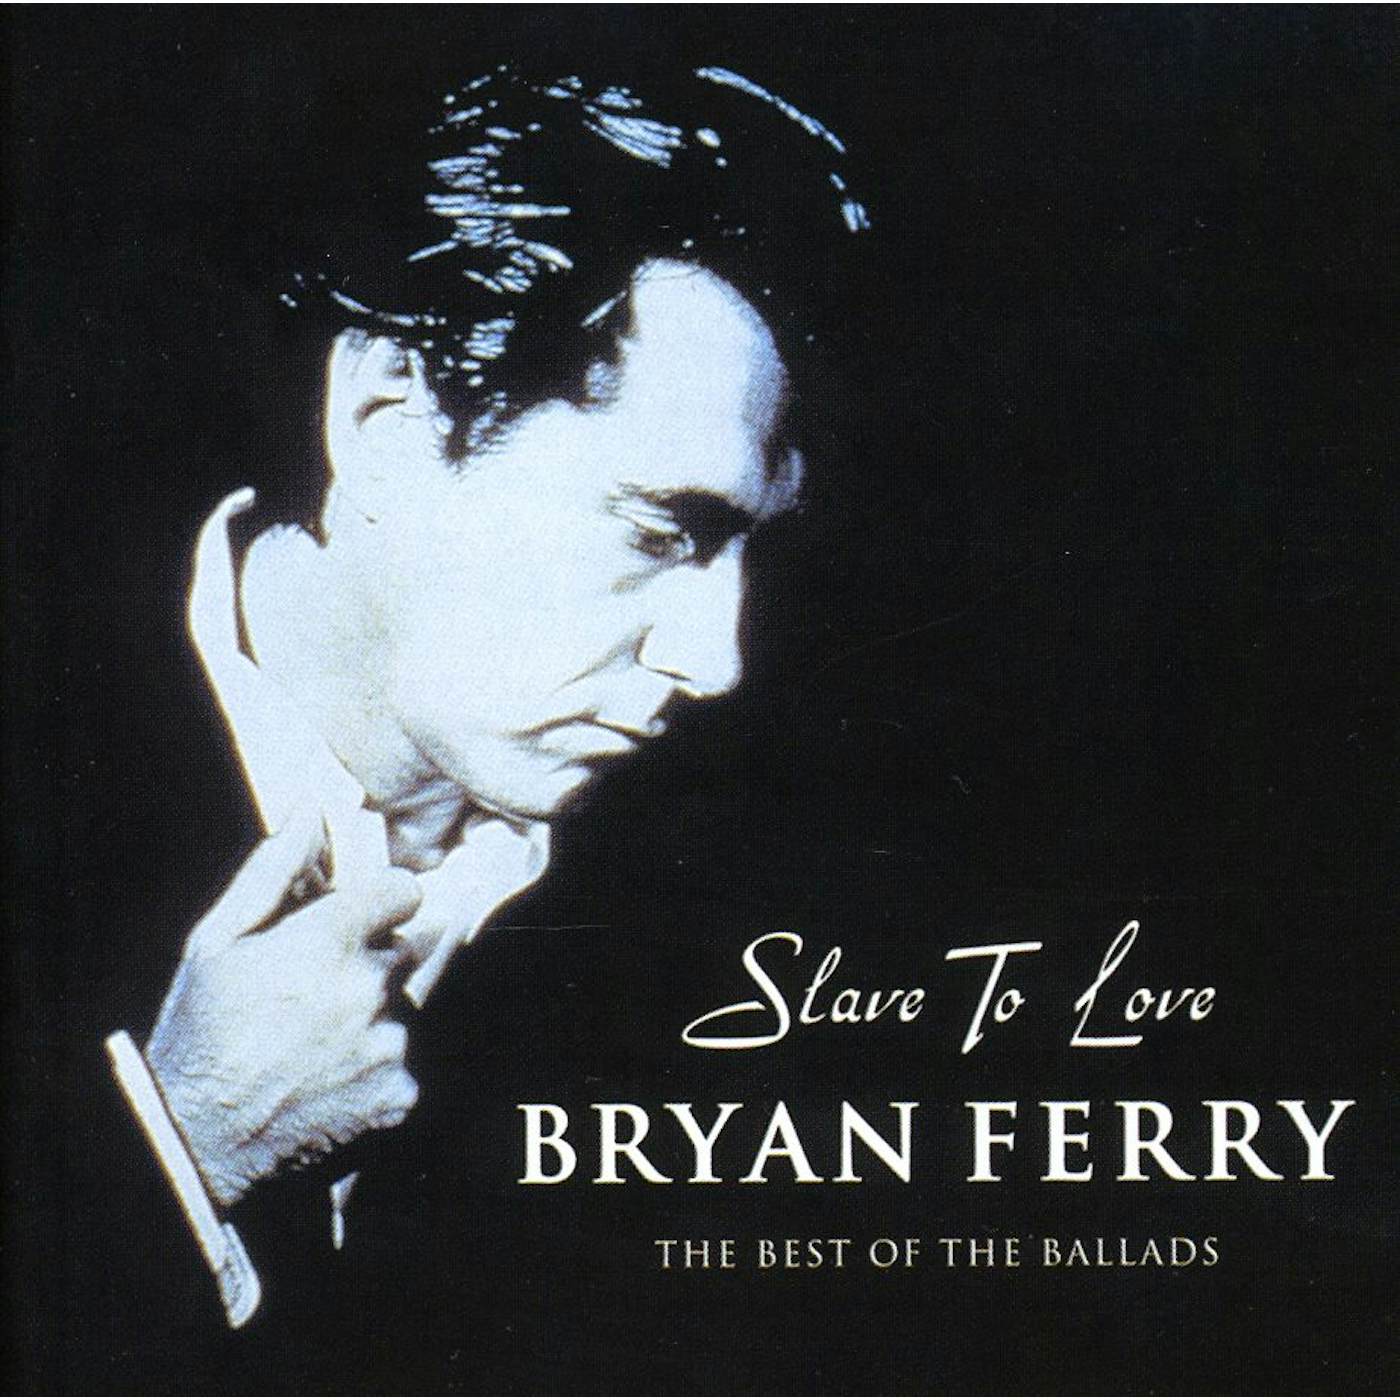 Bryan Ferry SLAVE TO LOVE: BEST OF THE BALLADS CD